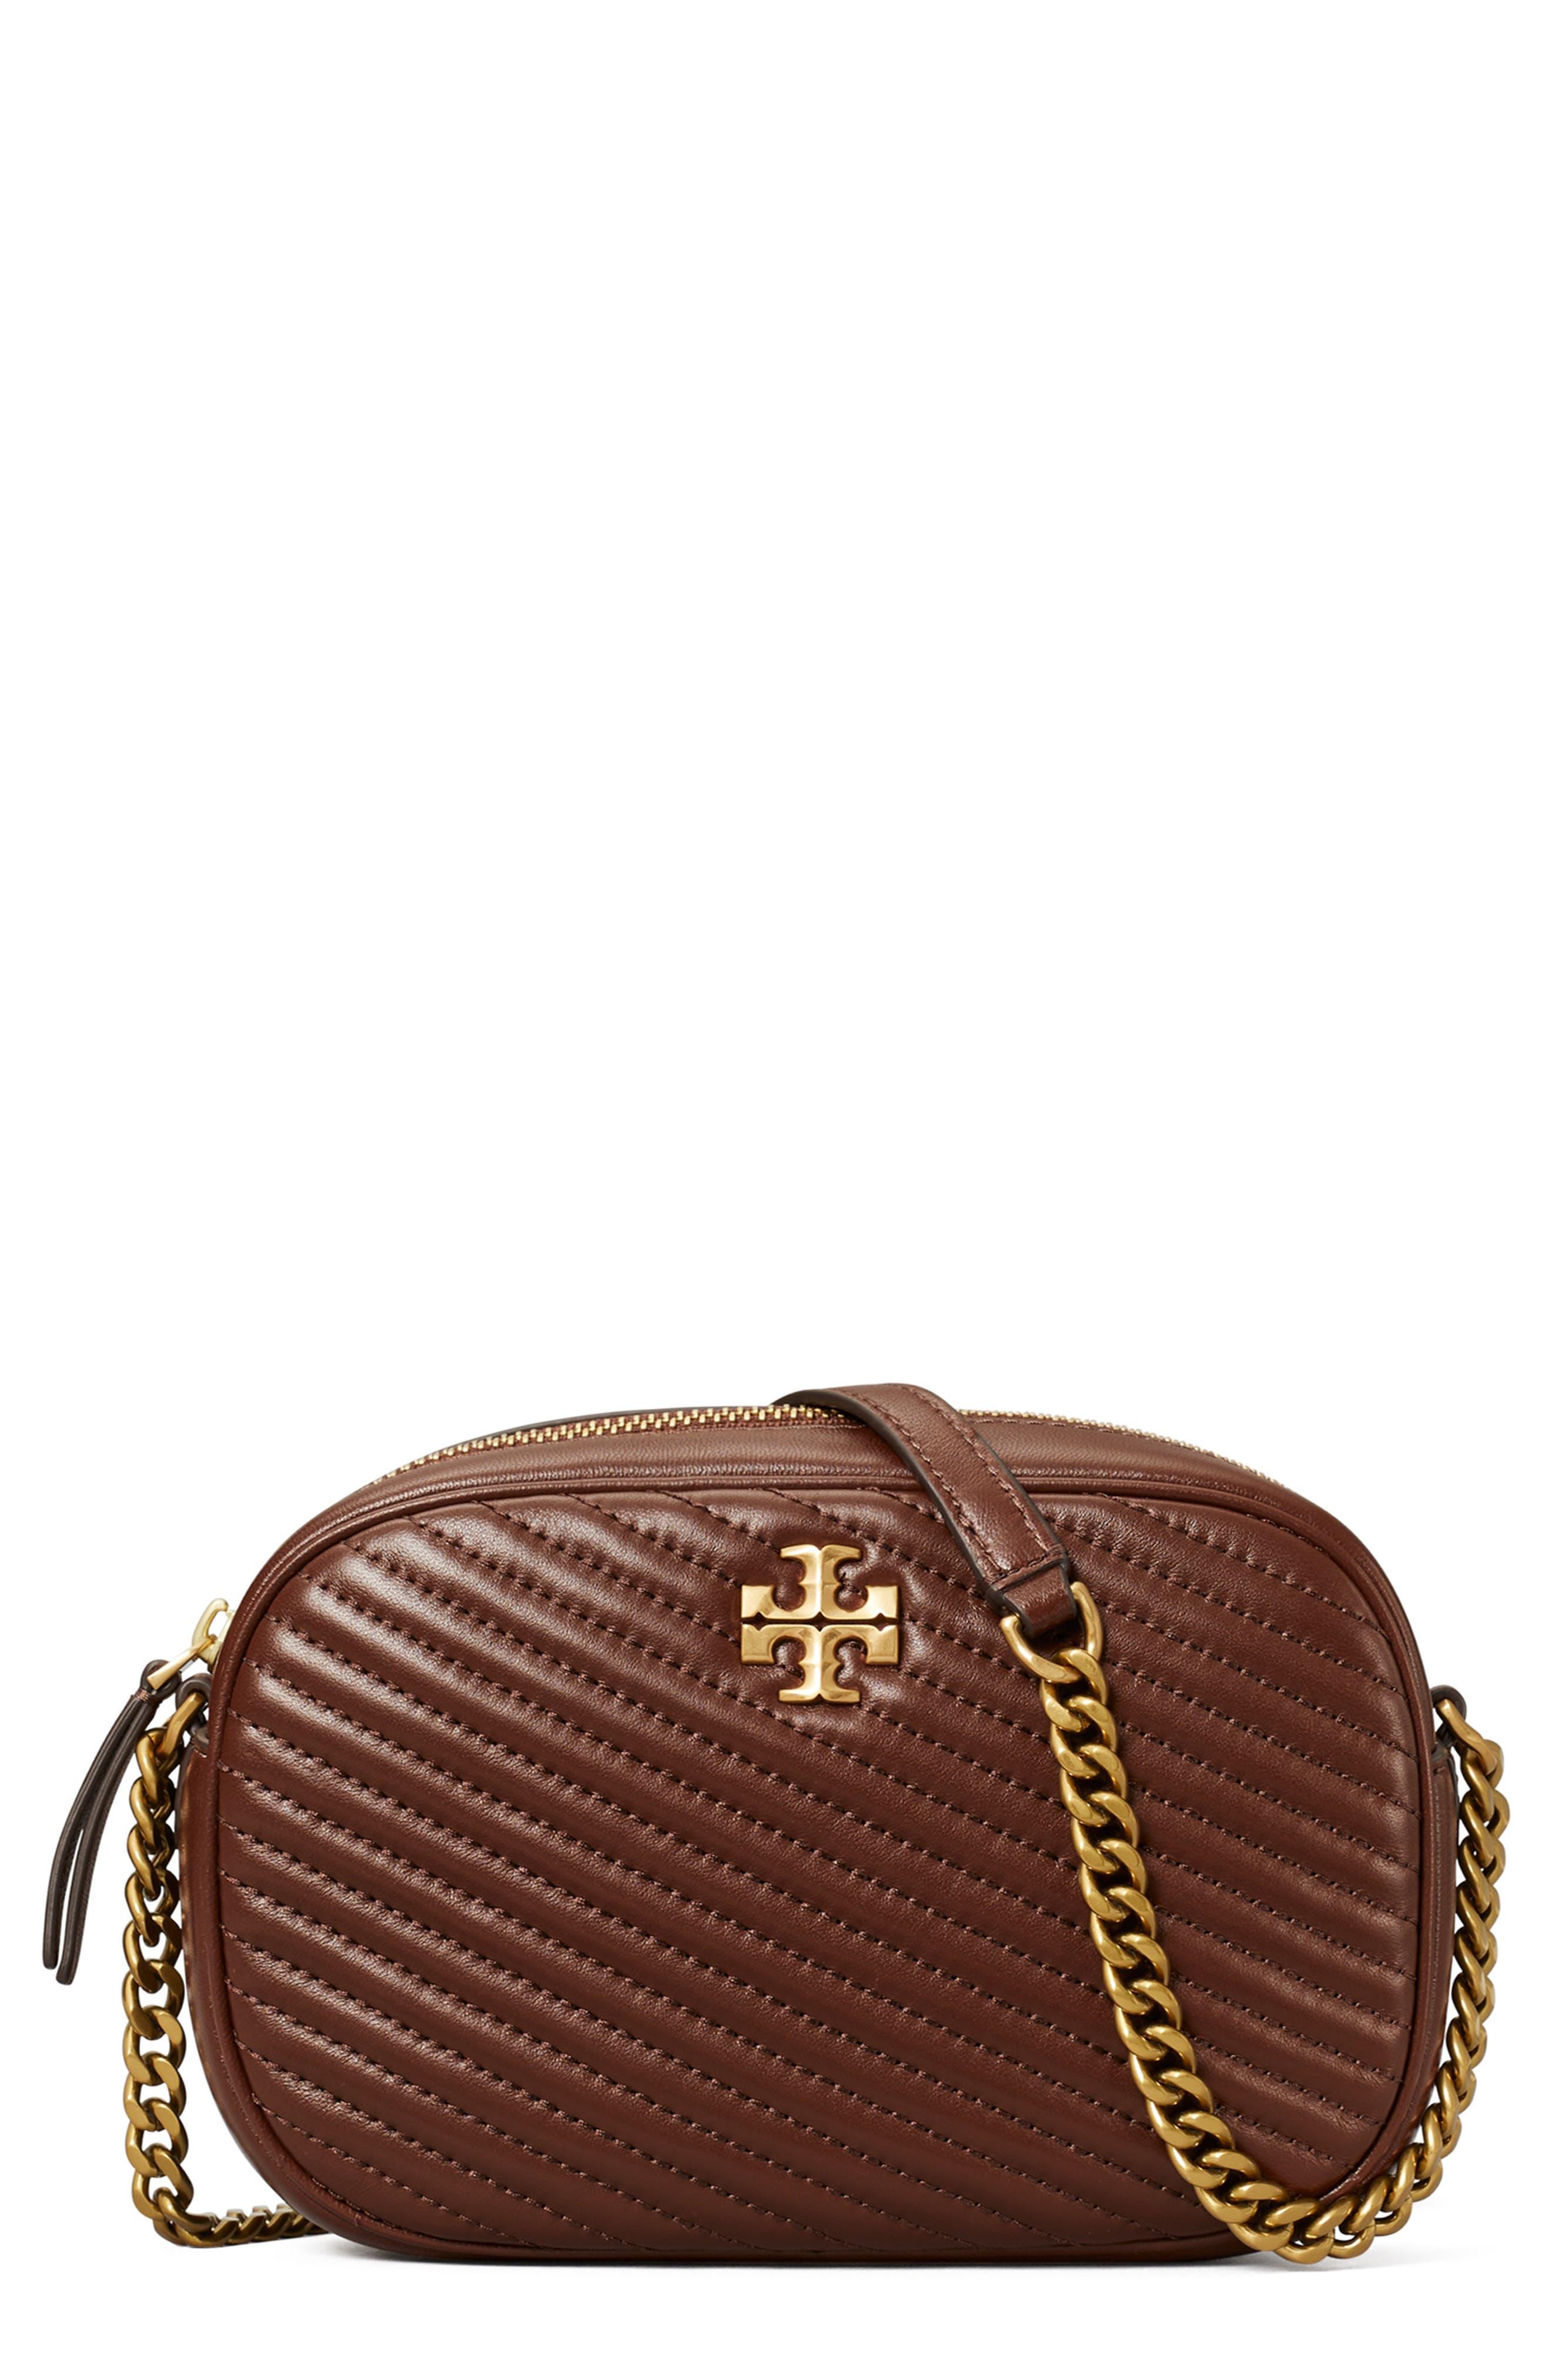 Tory Burch Small Kira Chevron Quilted Leather Crossbody Bags in Brown